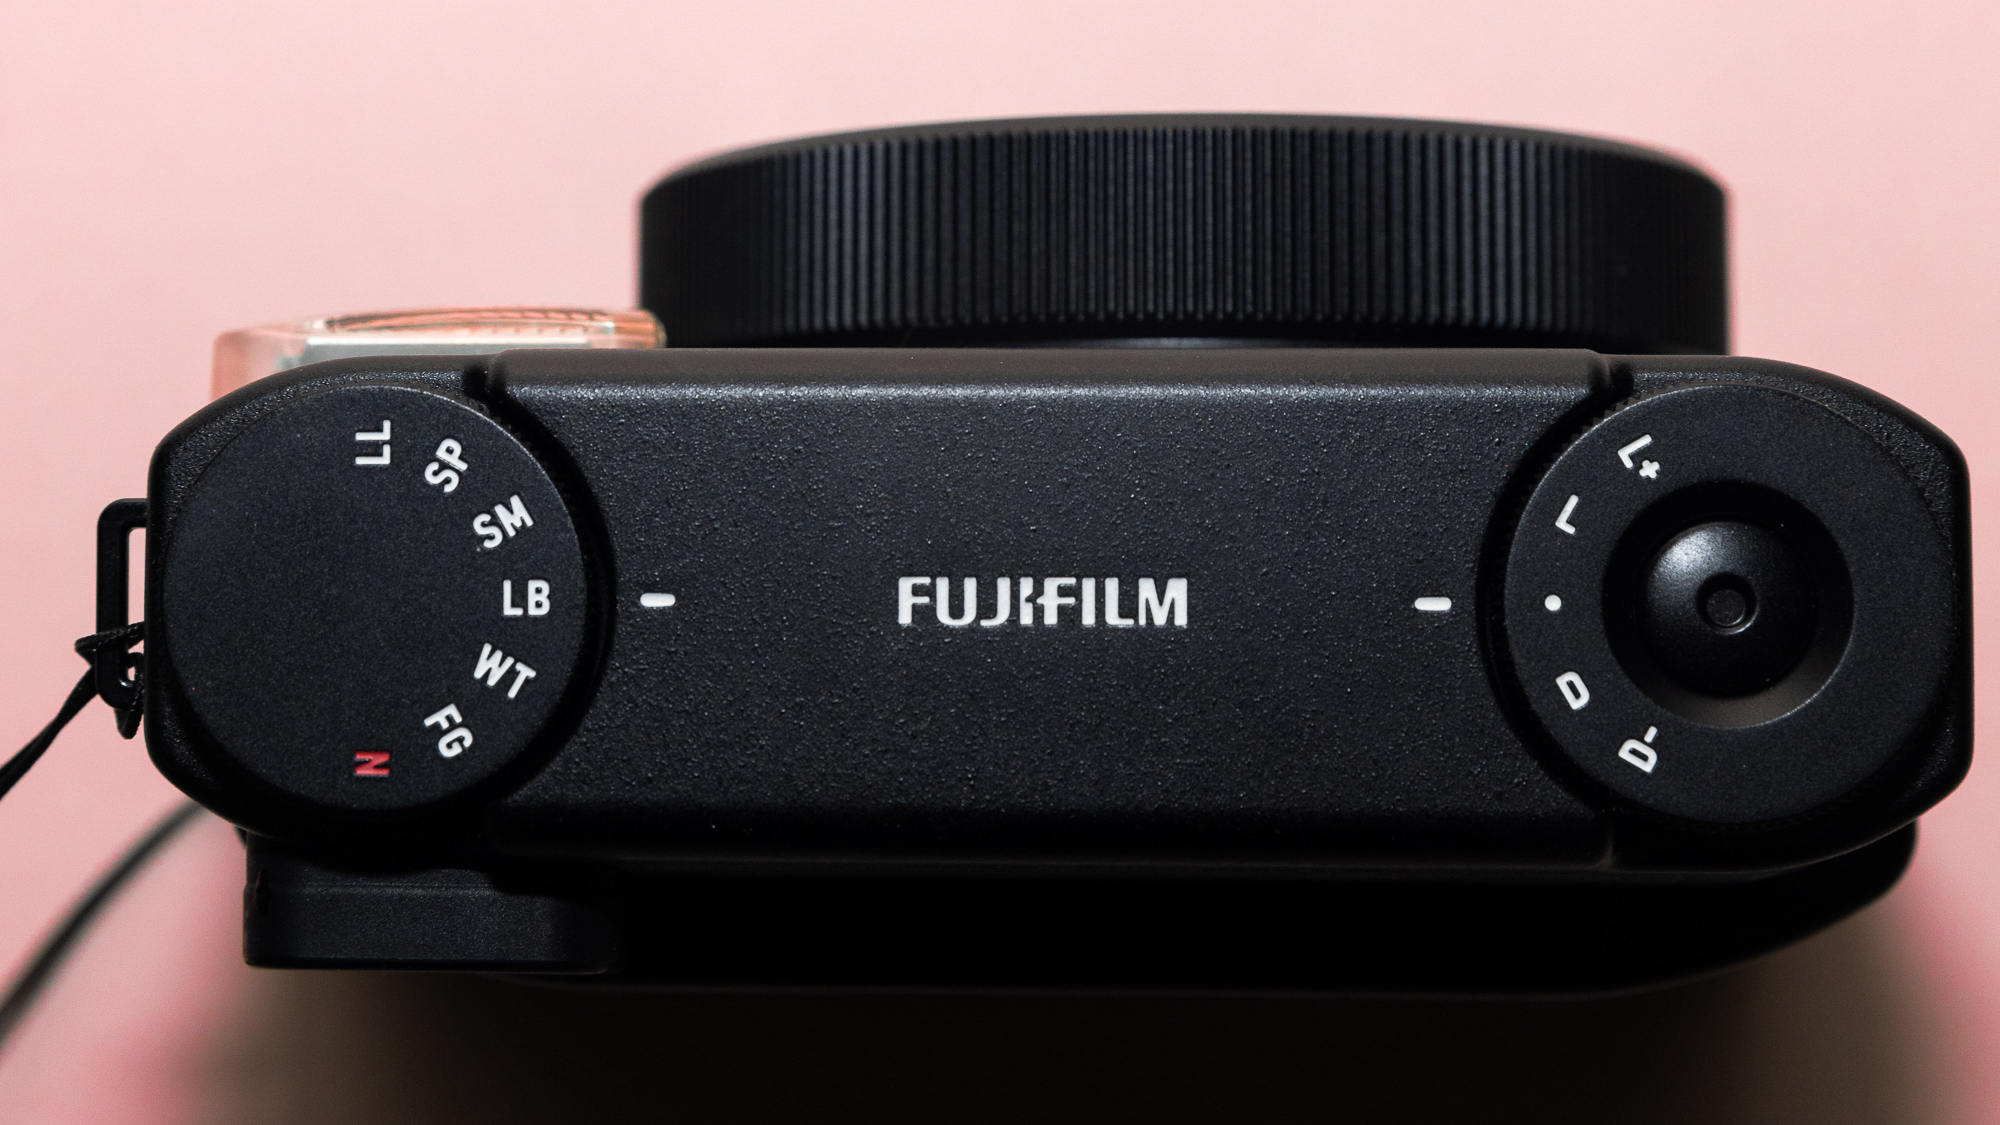 A photograph of the Fujifilm Instax mini 99 in black, set against a pink background.